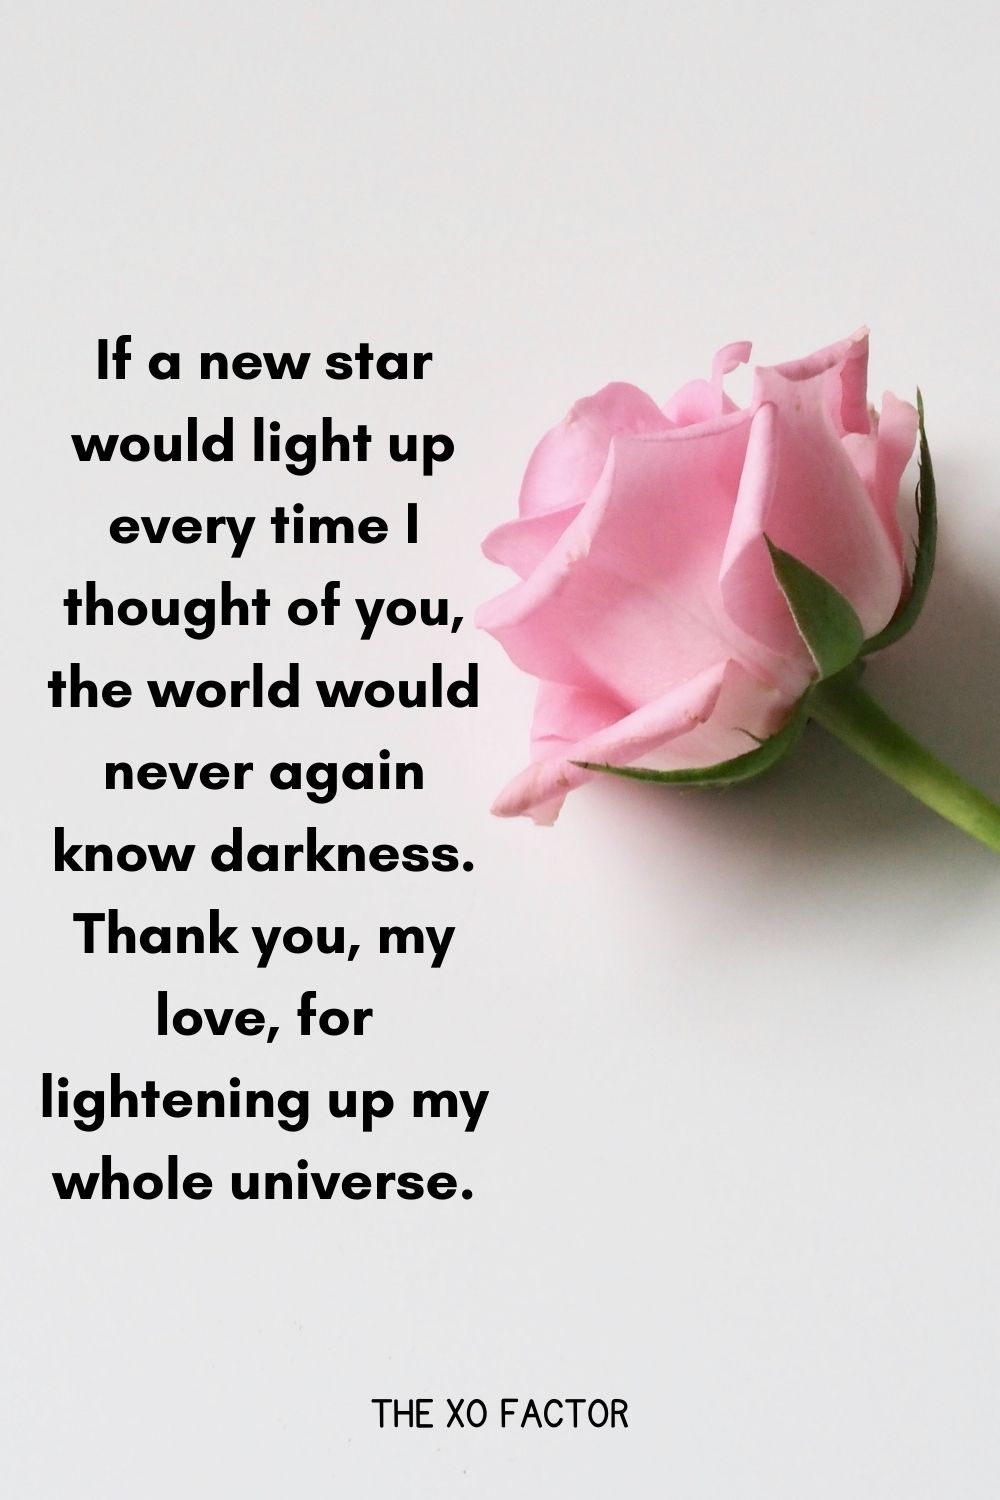 If a new star would light up every time I thought of you, the world would never again know darkness. Thank you, my love, for lightening up my whole universe.